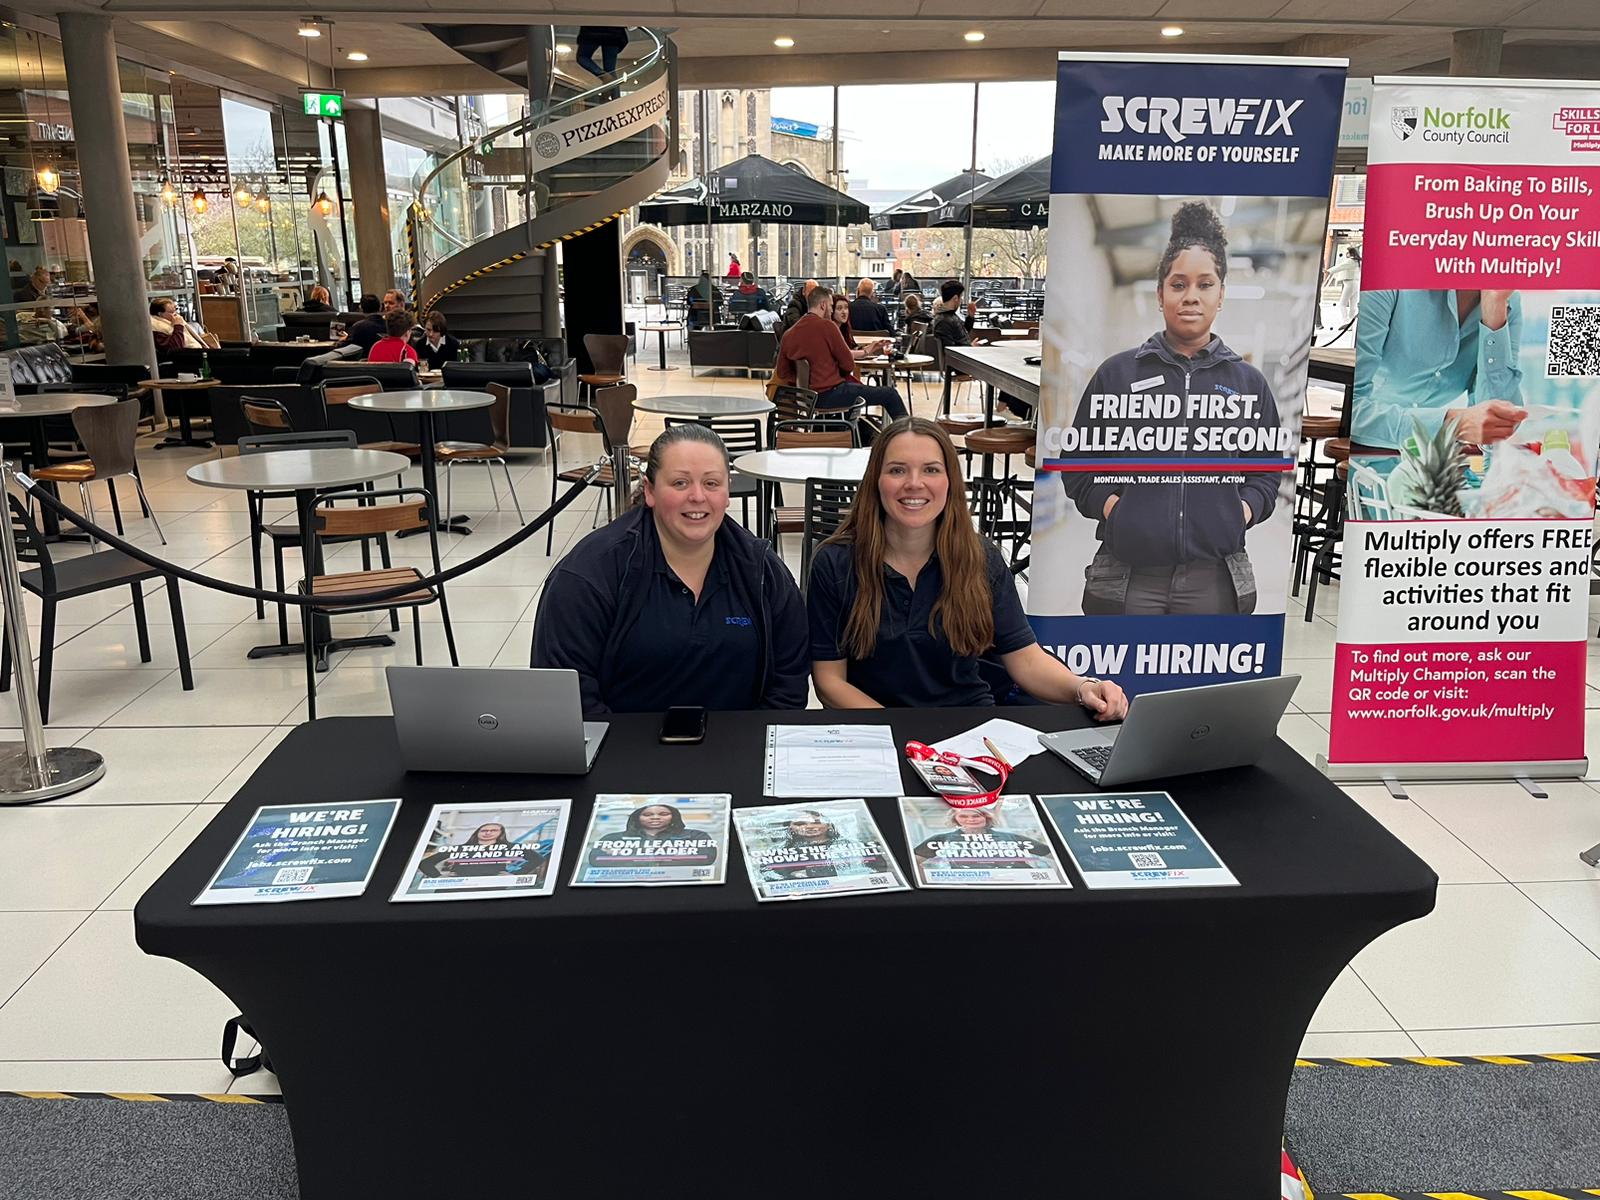 Screwfix at our event in Norwich